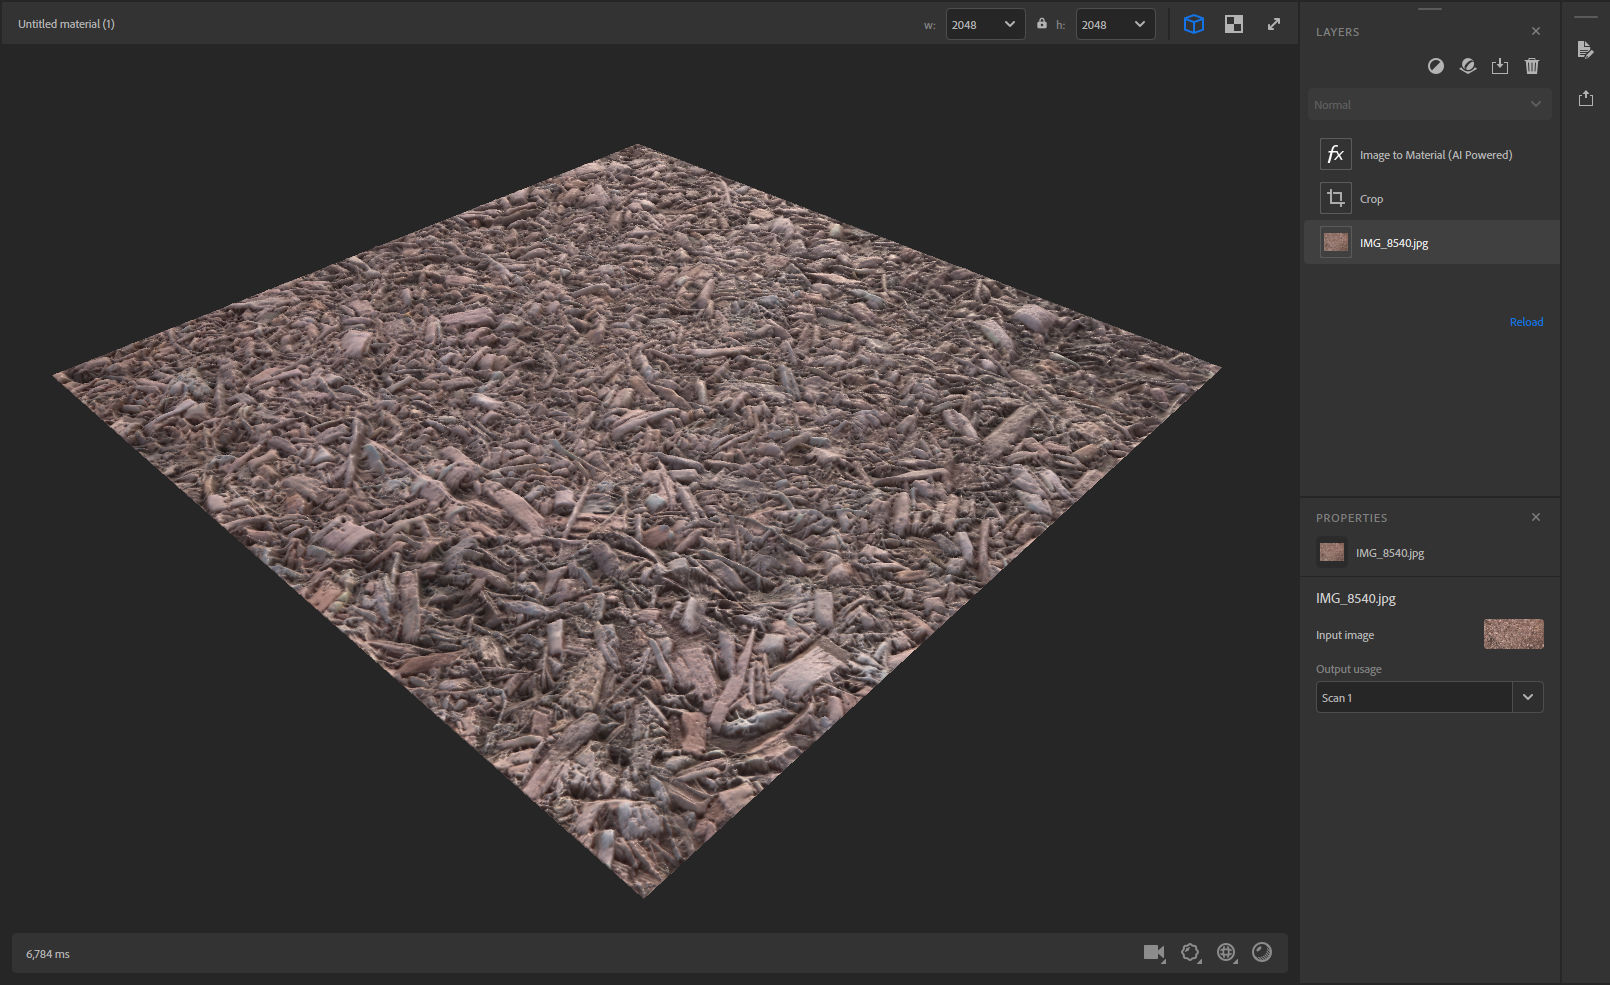 A screenshot of Sampler using the Image to Material workflow.